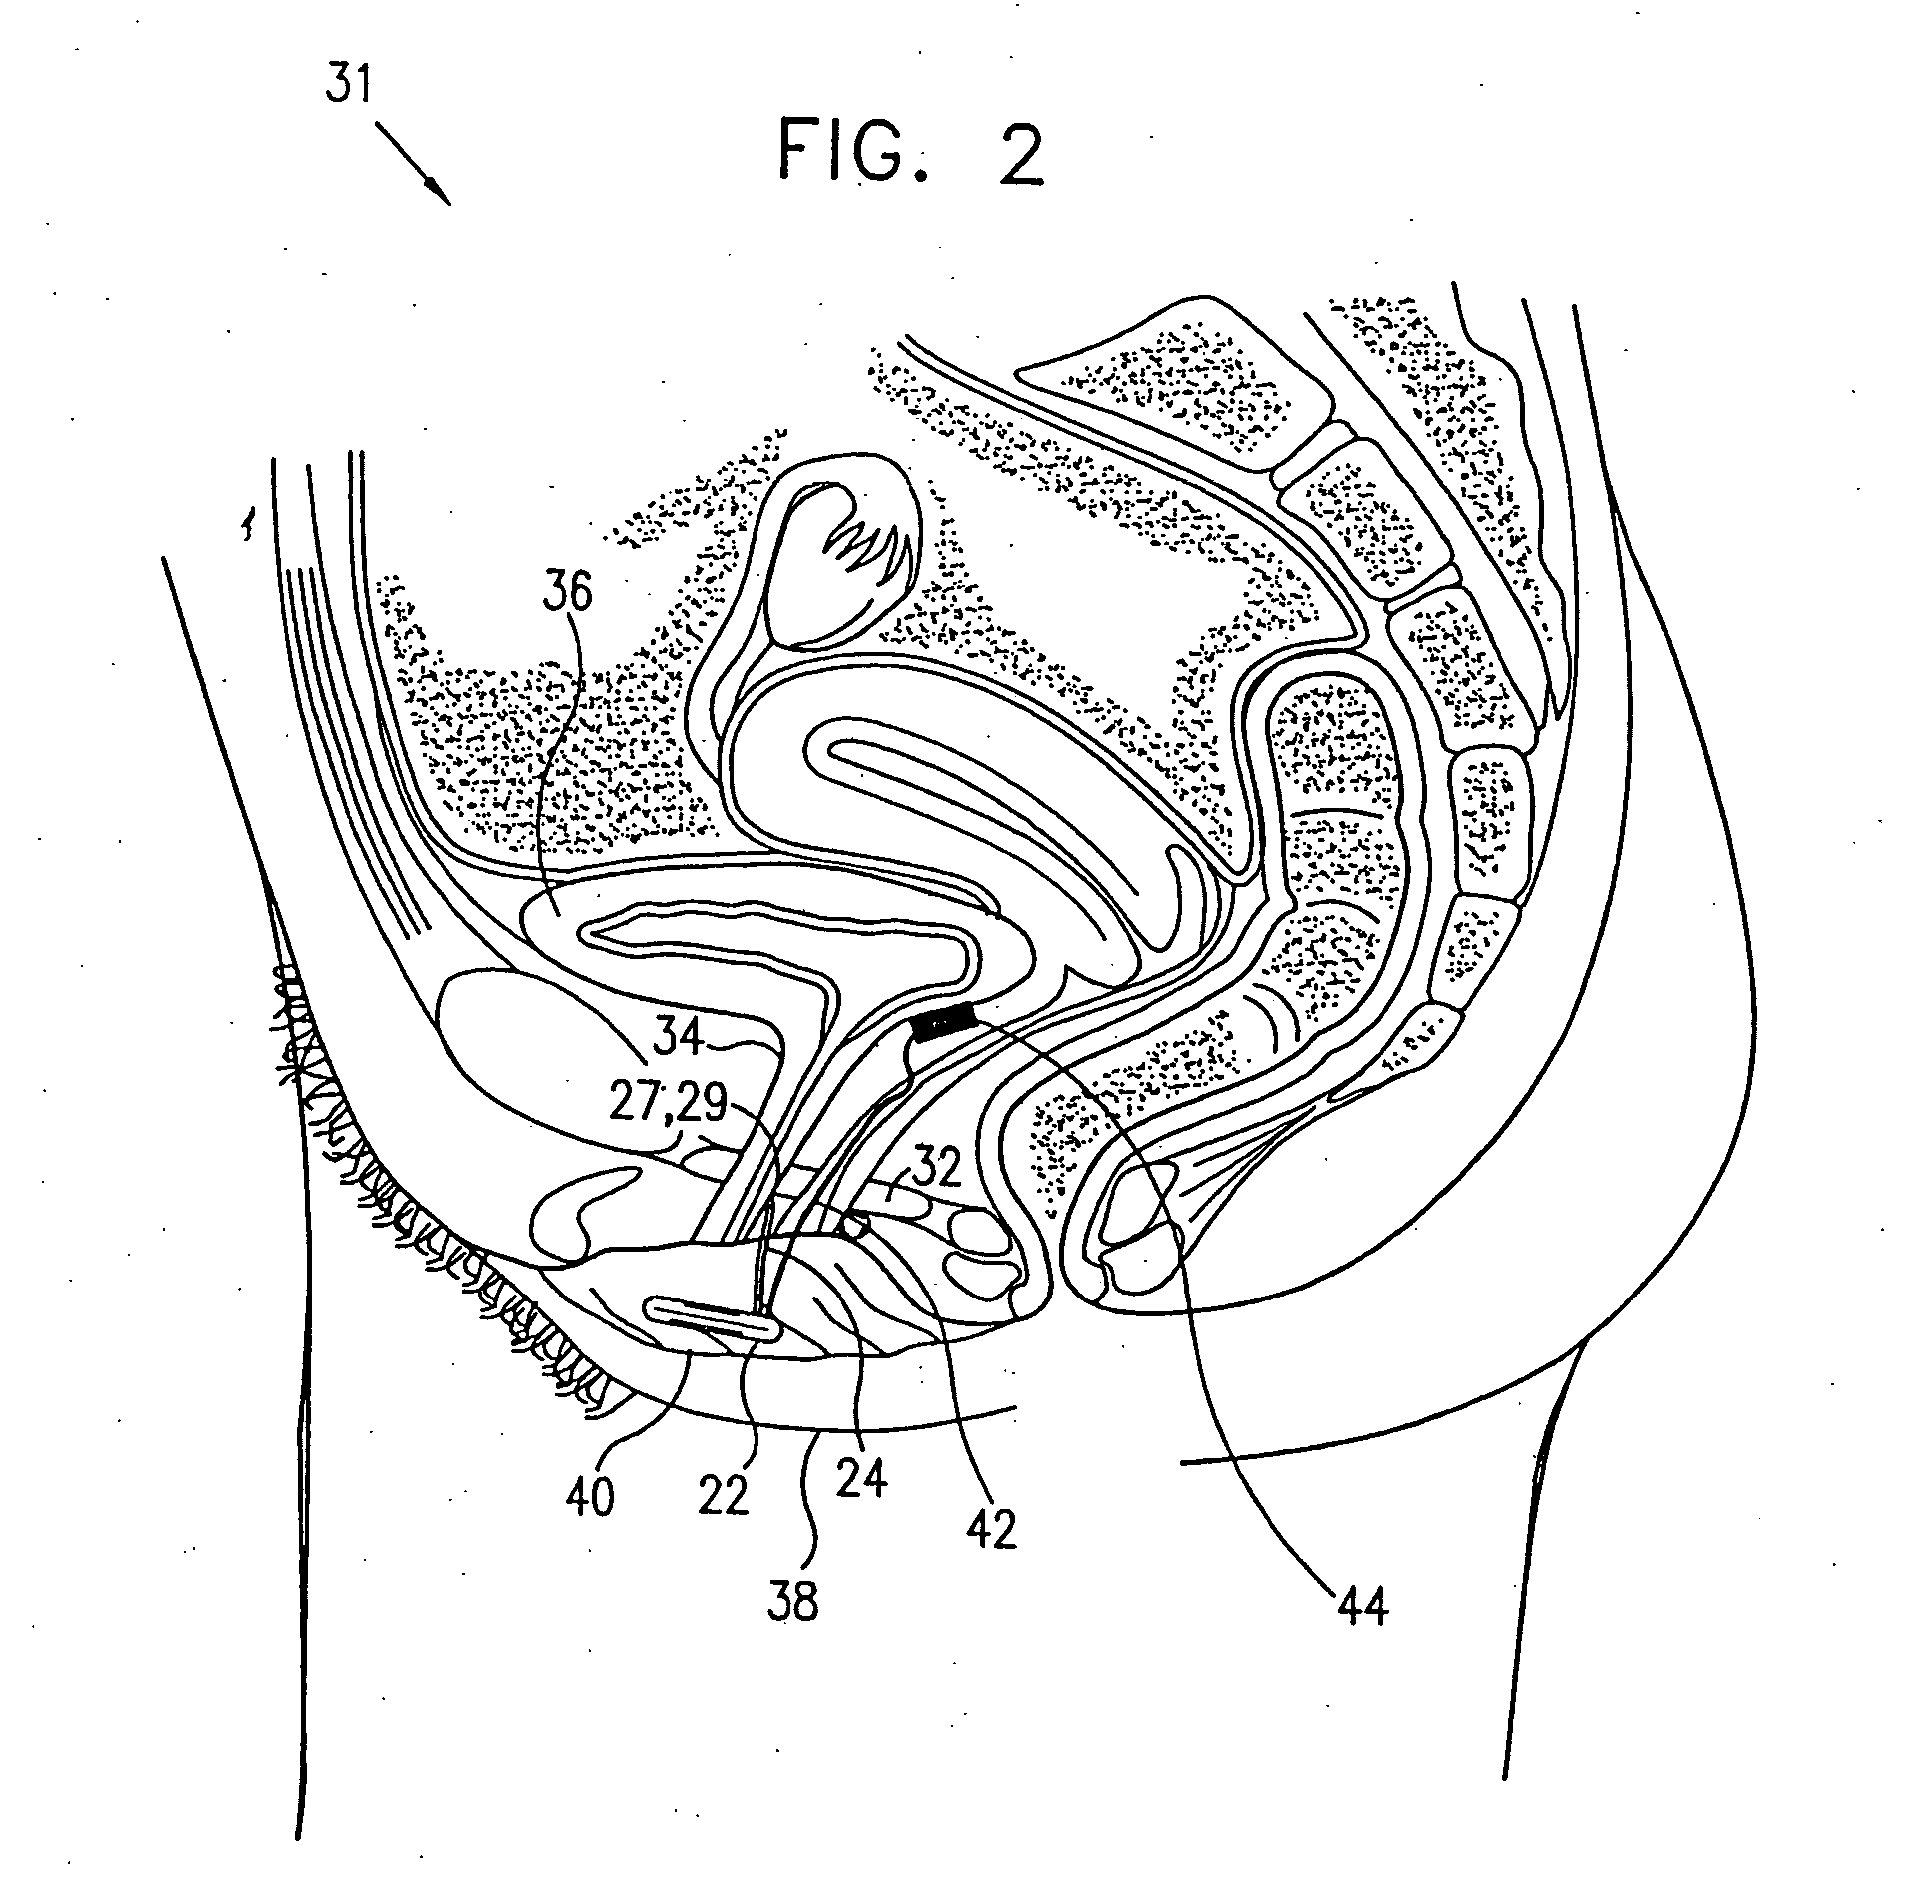 Incontinence treatment device